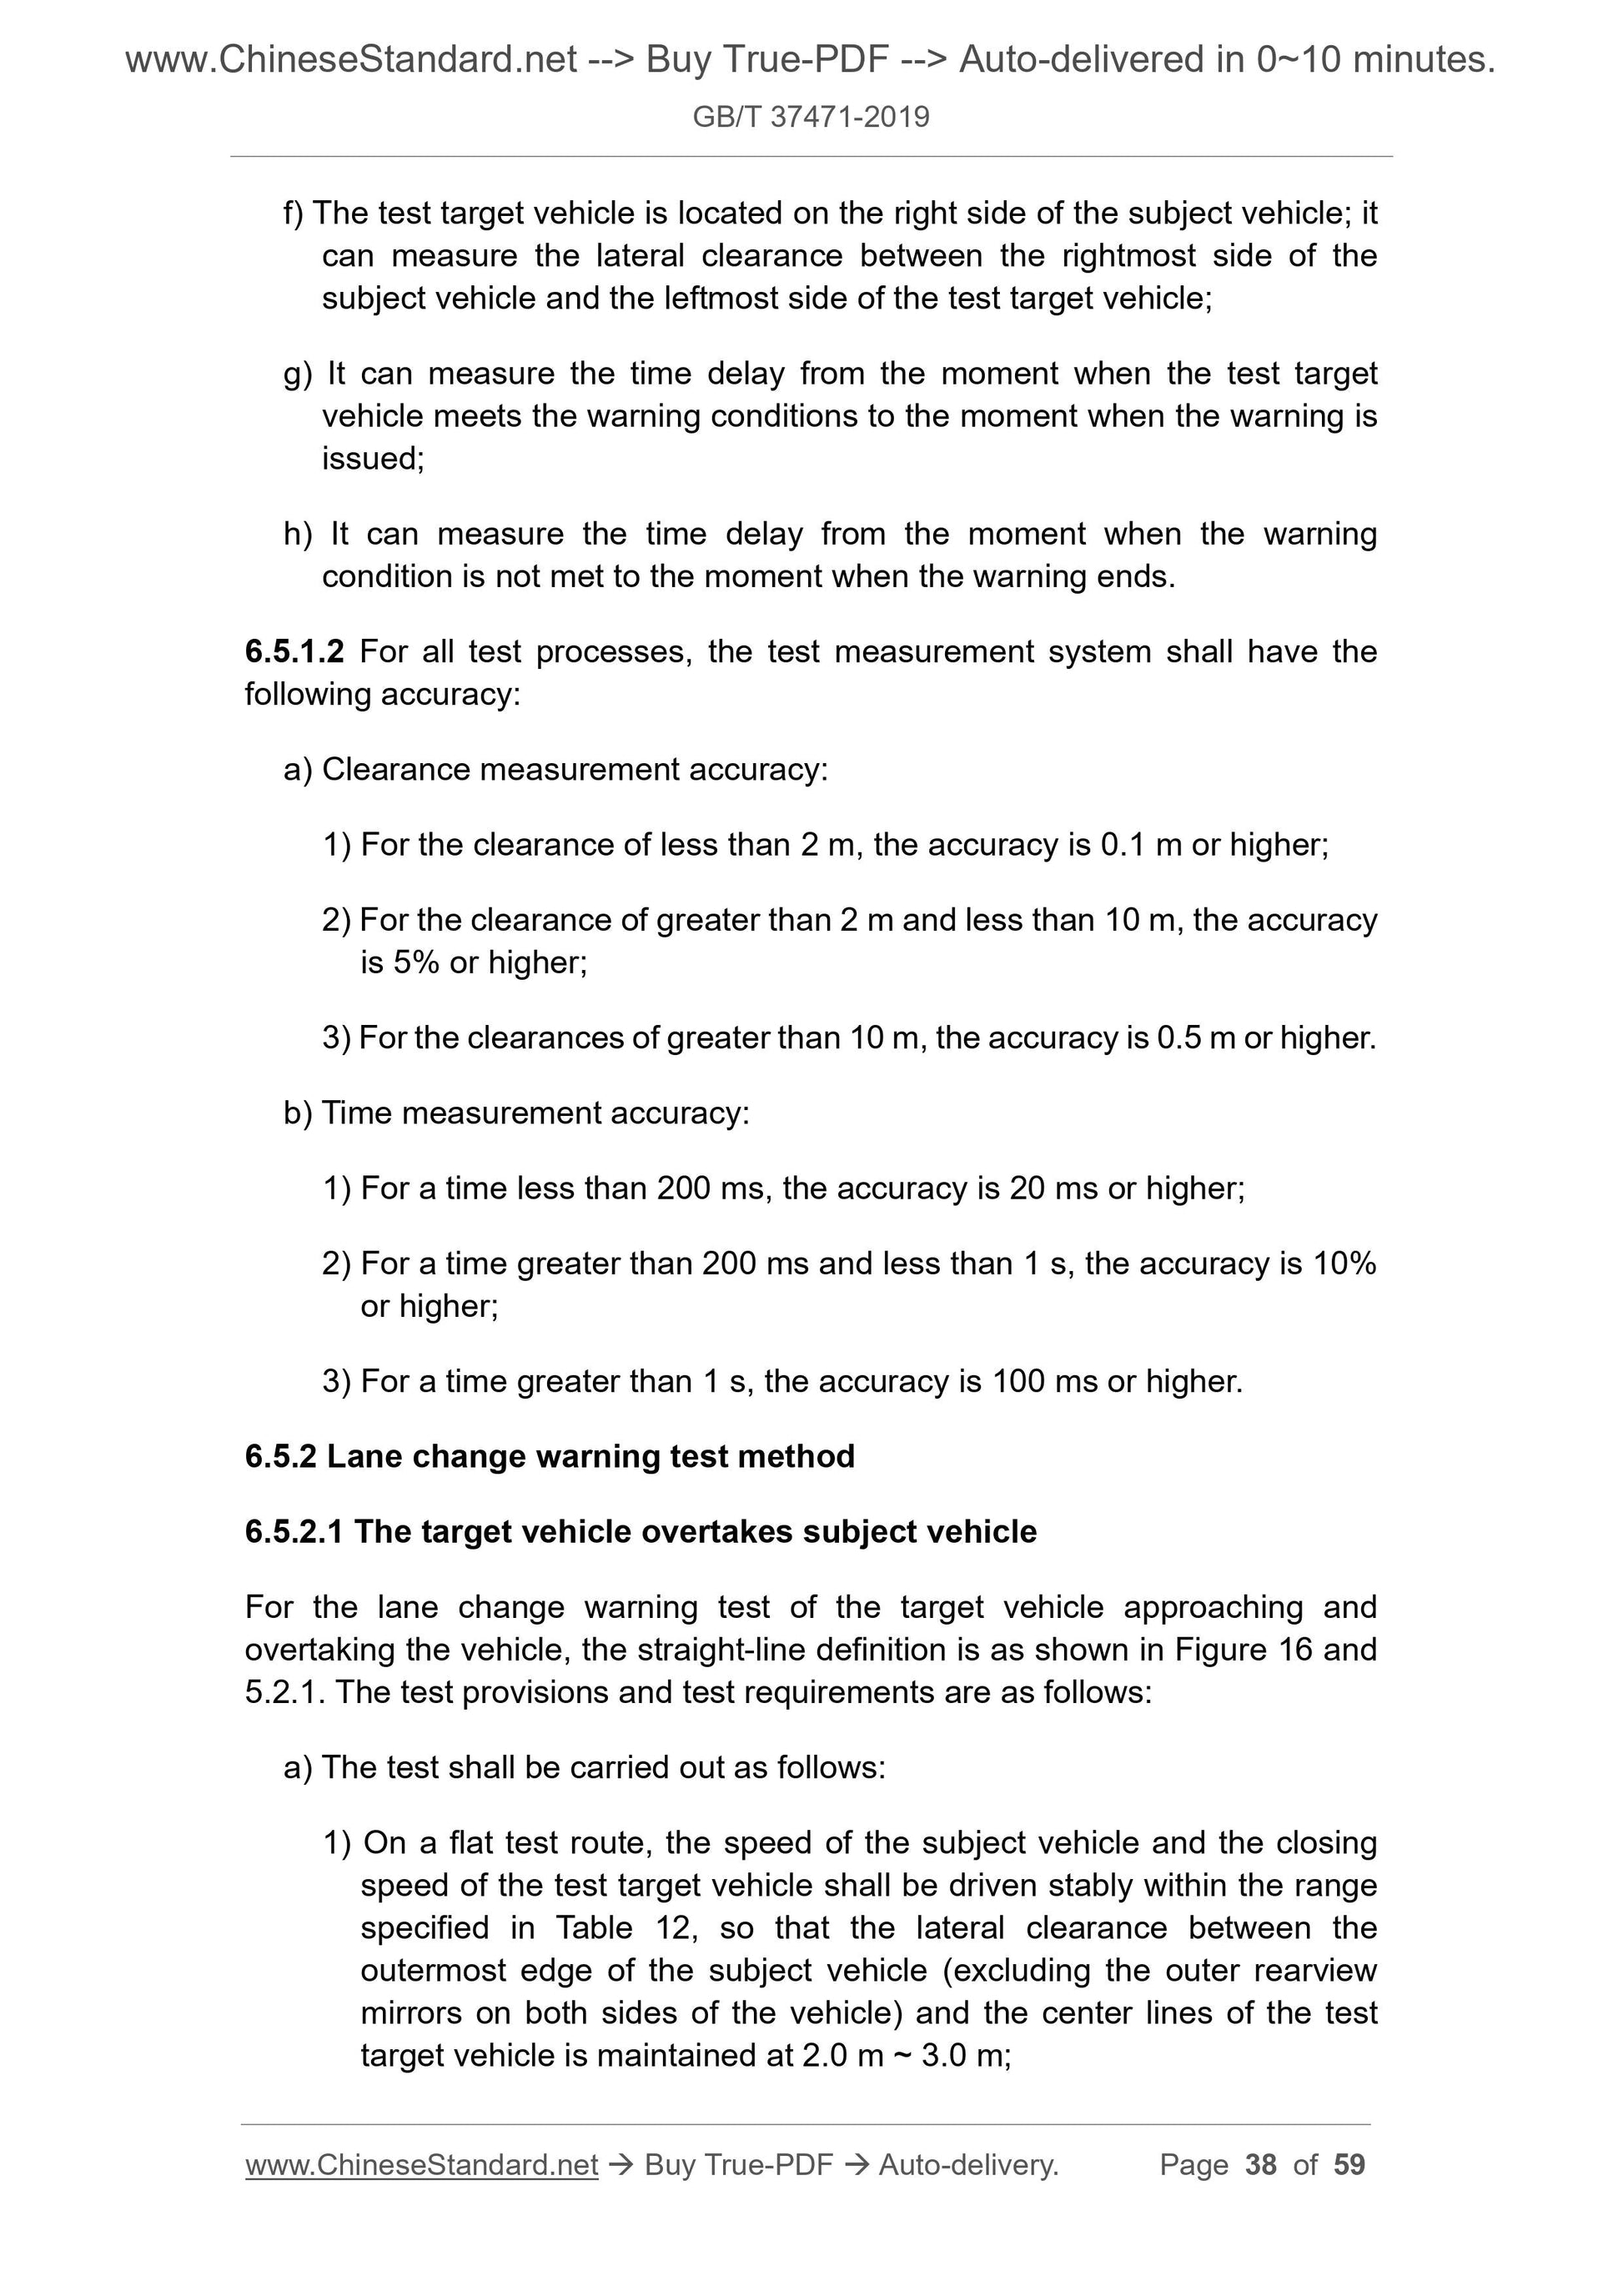 GB/T 37471-2019 Page 11